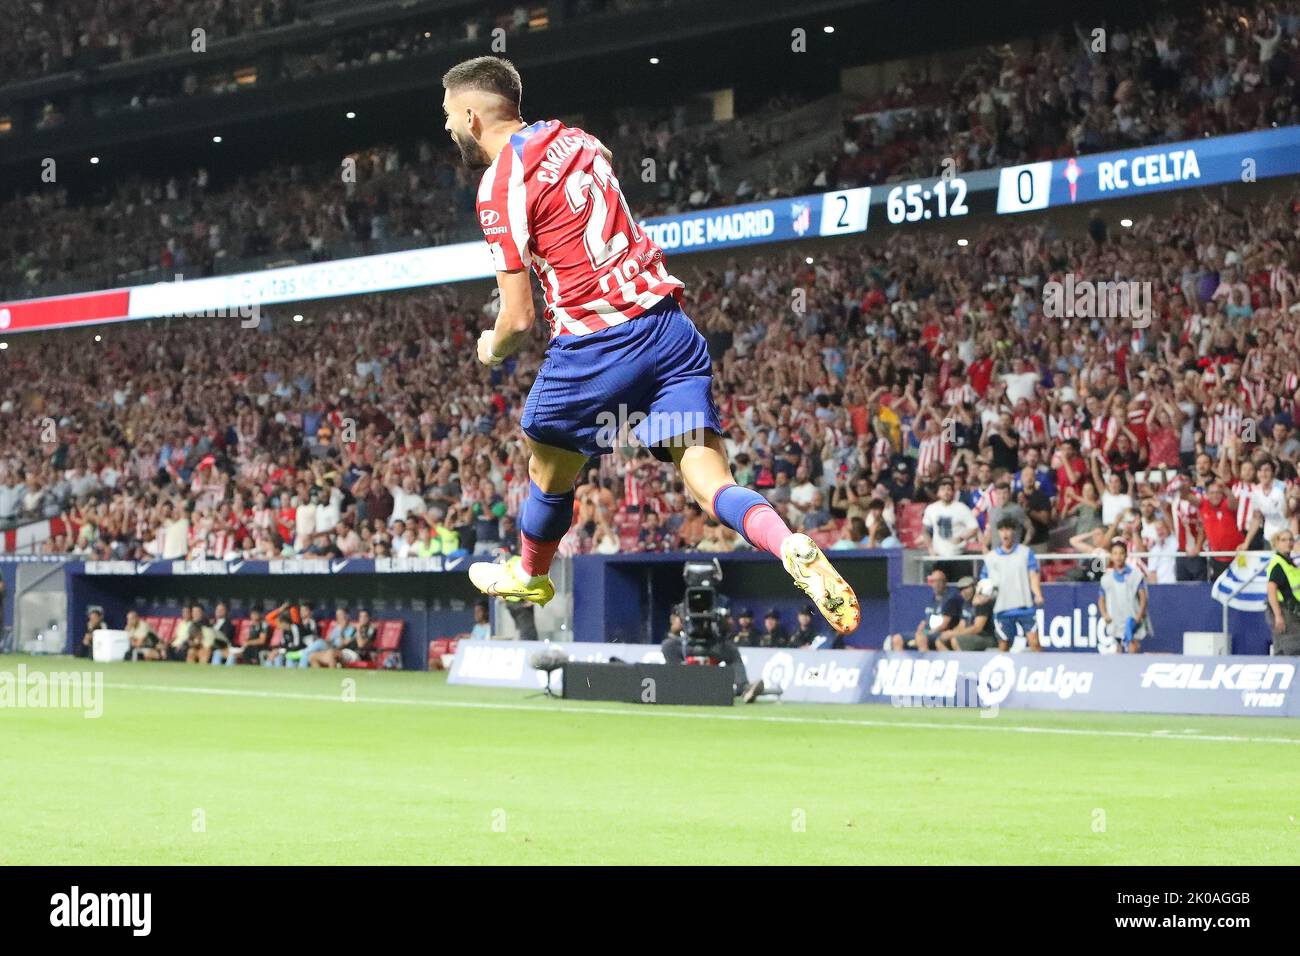 Madrid, Spain. 10th Sep, 2022. Atletico´s Carrasco celebrates during La Liga match day 5 between Atletico de Madrid and Celta at Civitas Metropolitano Stadium in Madrid, Spain, on September 10, 2022. Credit: Edward F. Peters/Alamy Live News Stock Photo